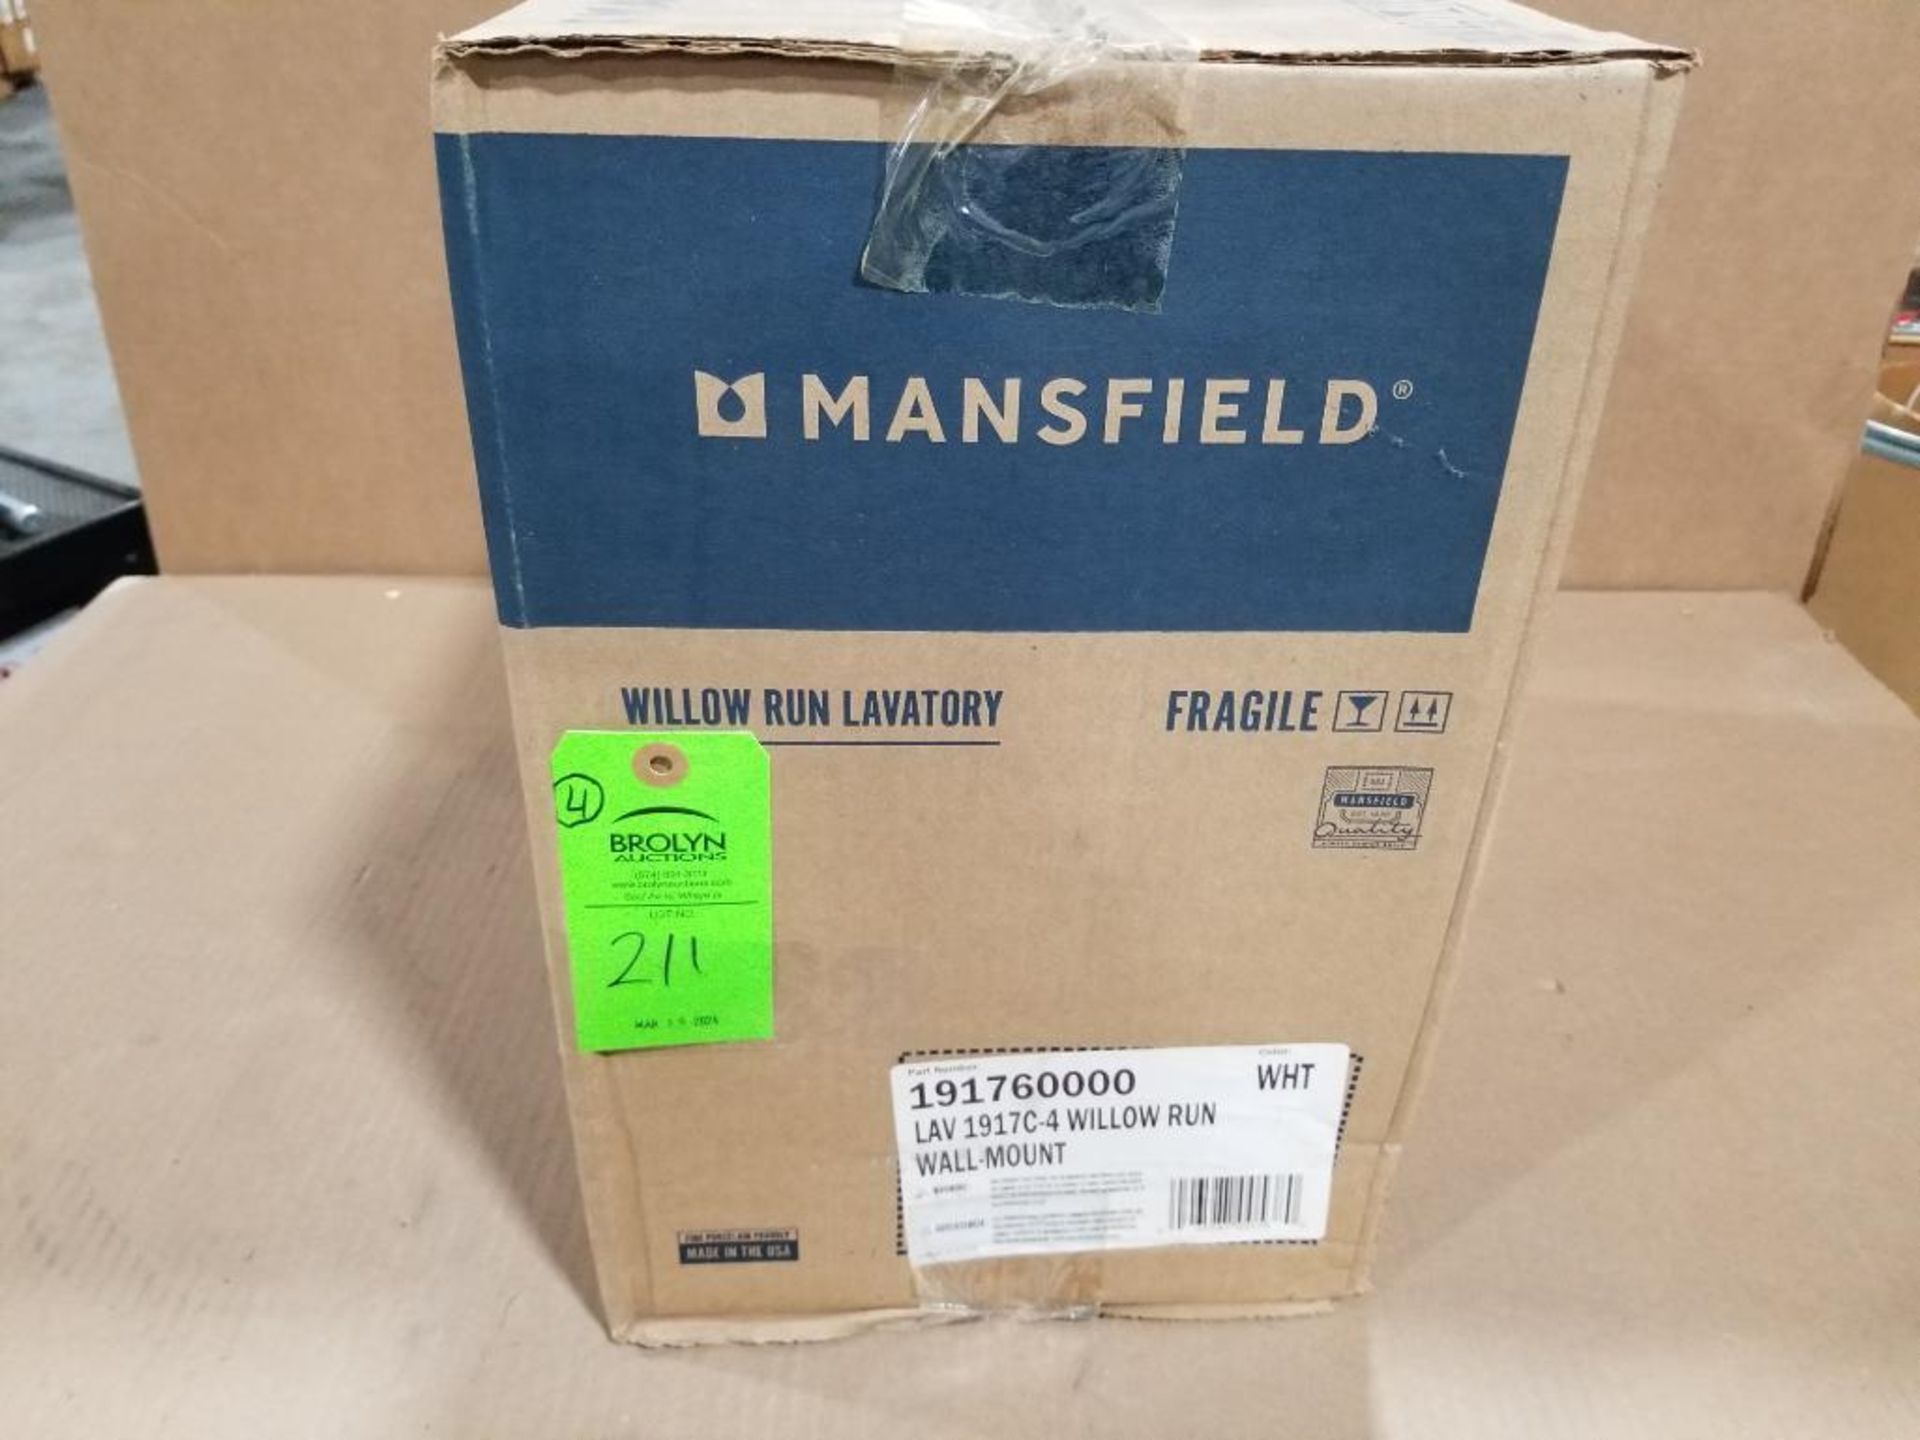 Qty 4 - Mansfield wall mount sink. Part number 191760000. White. LAV1917C-4.